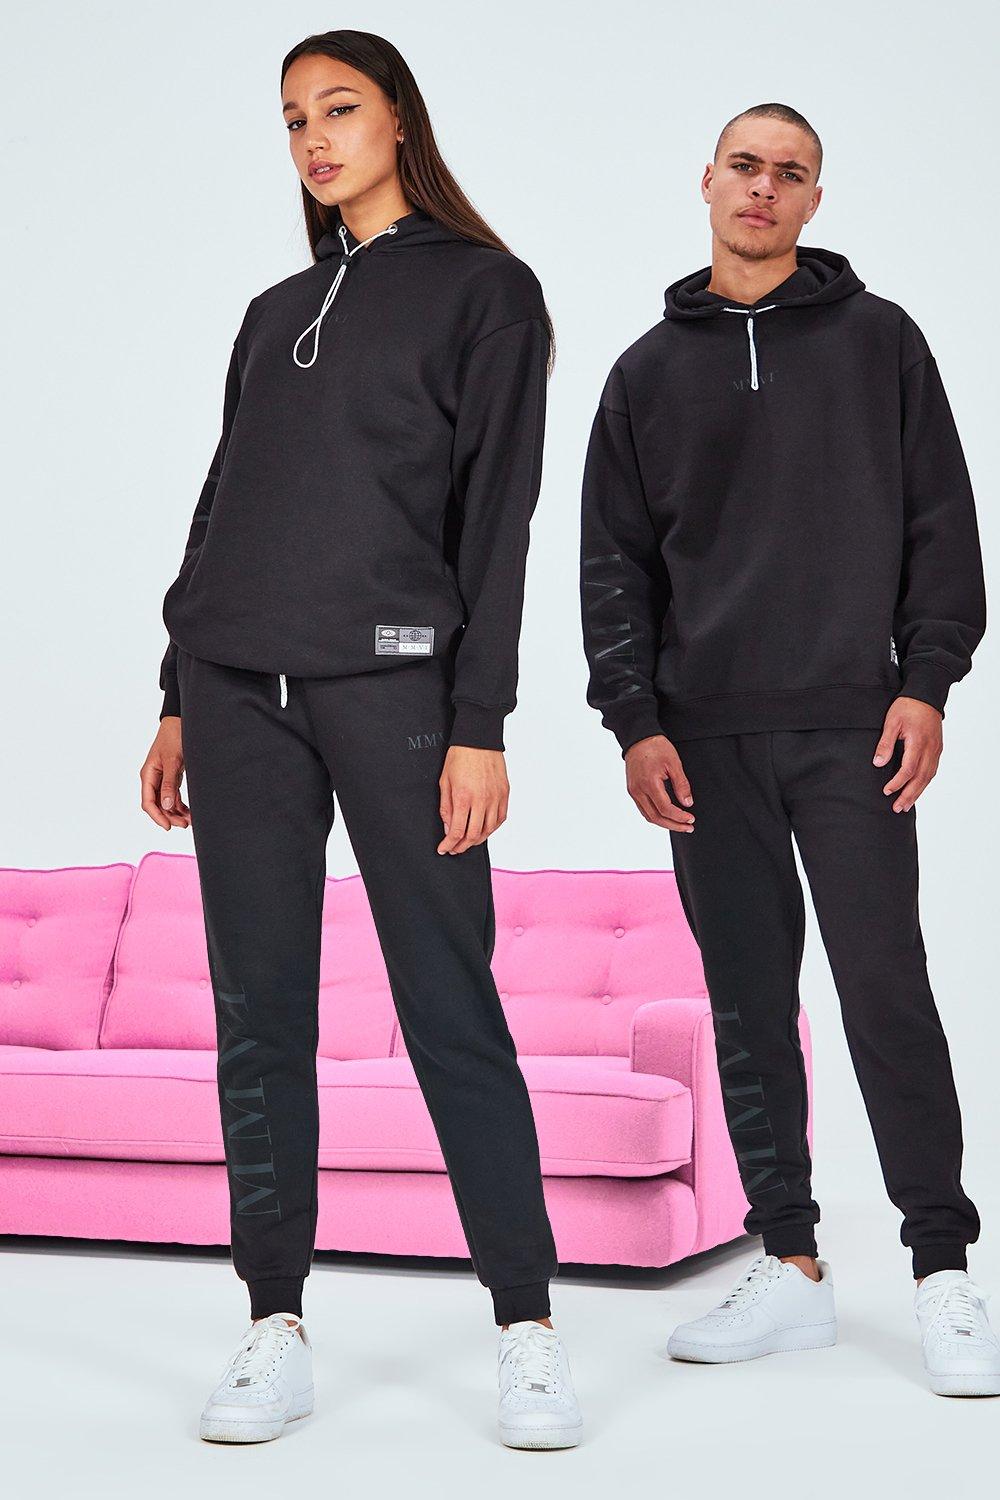 his and hers sweatsuits